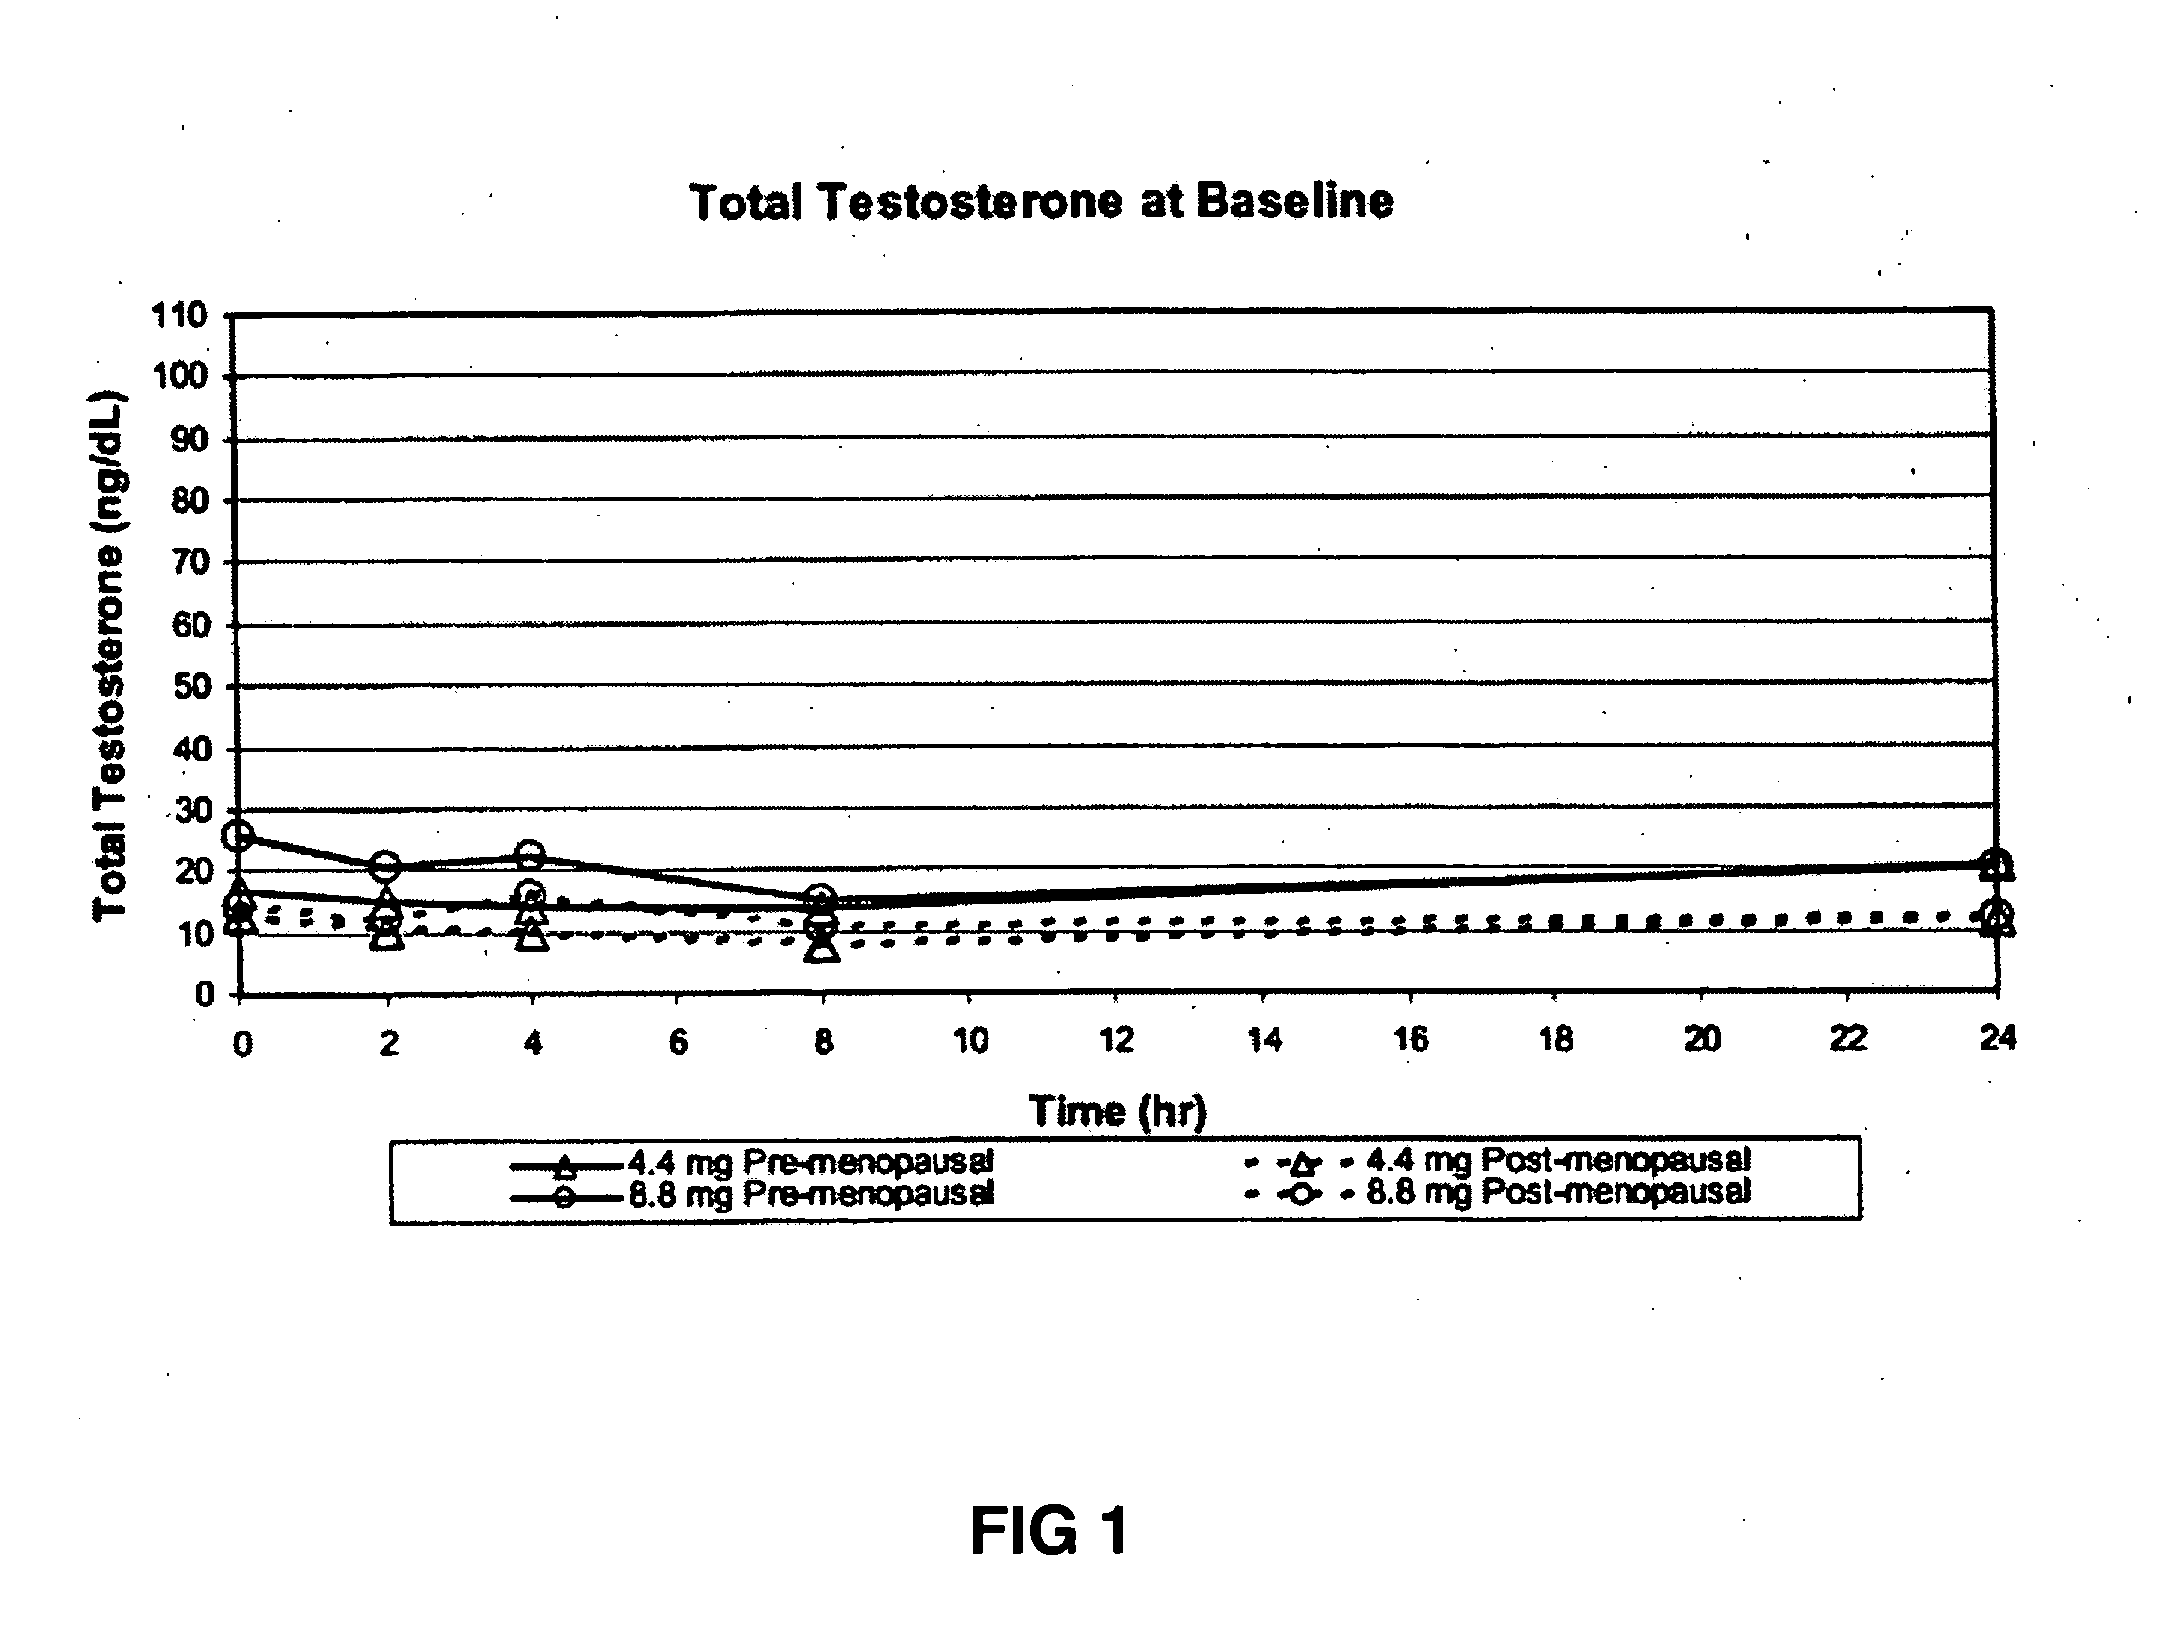 Method of increasing testosterone and related steriod concentrations in women